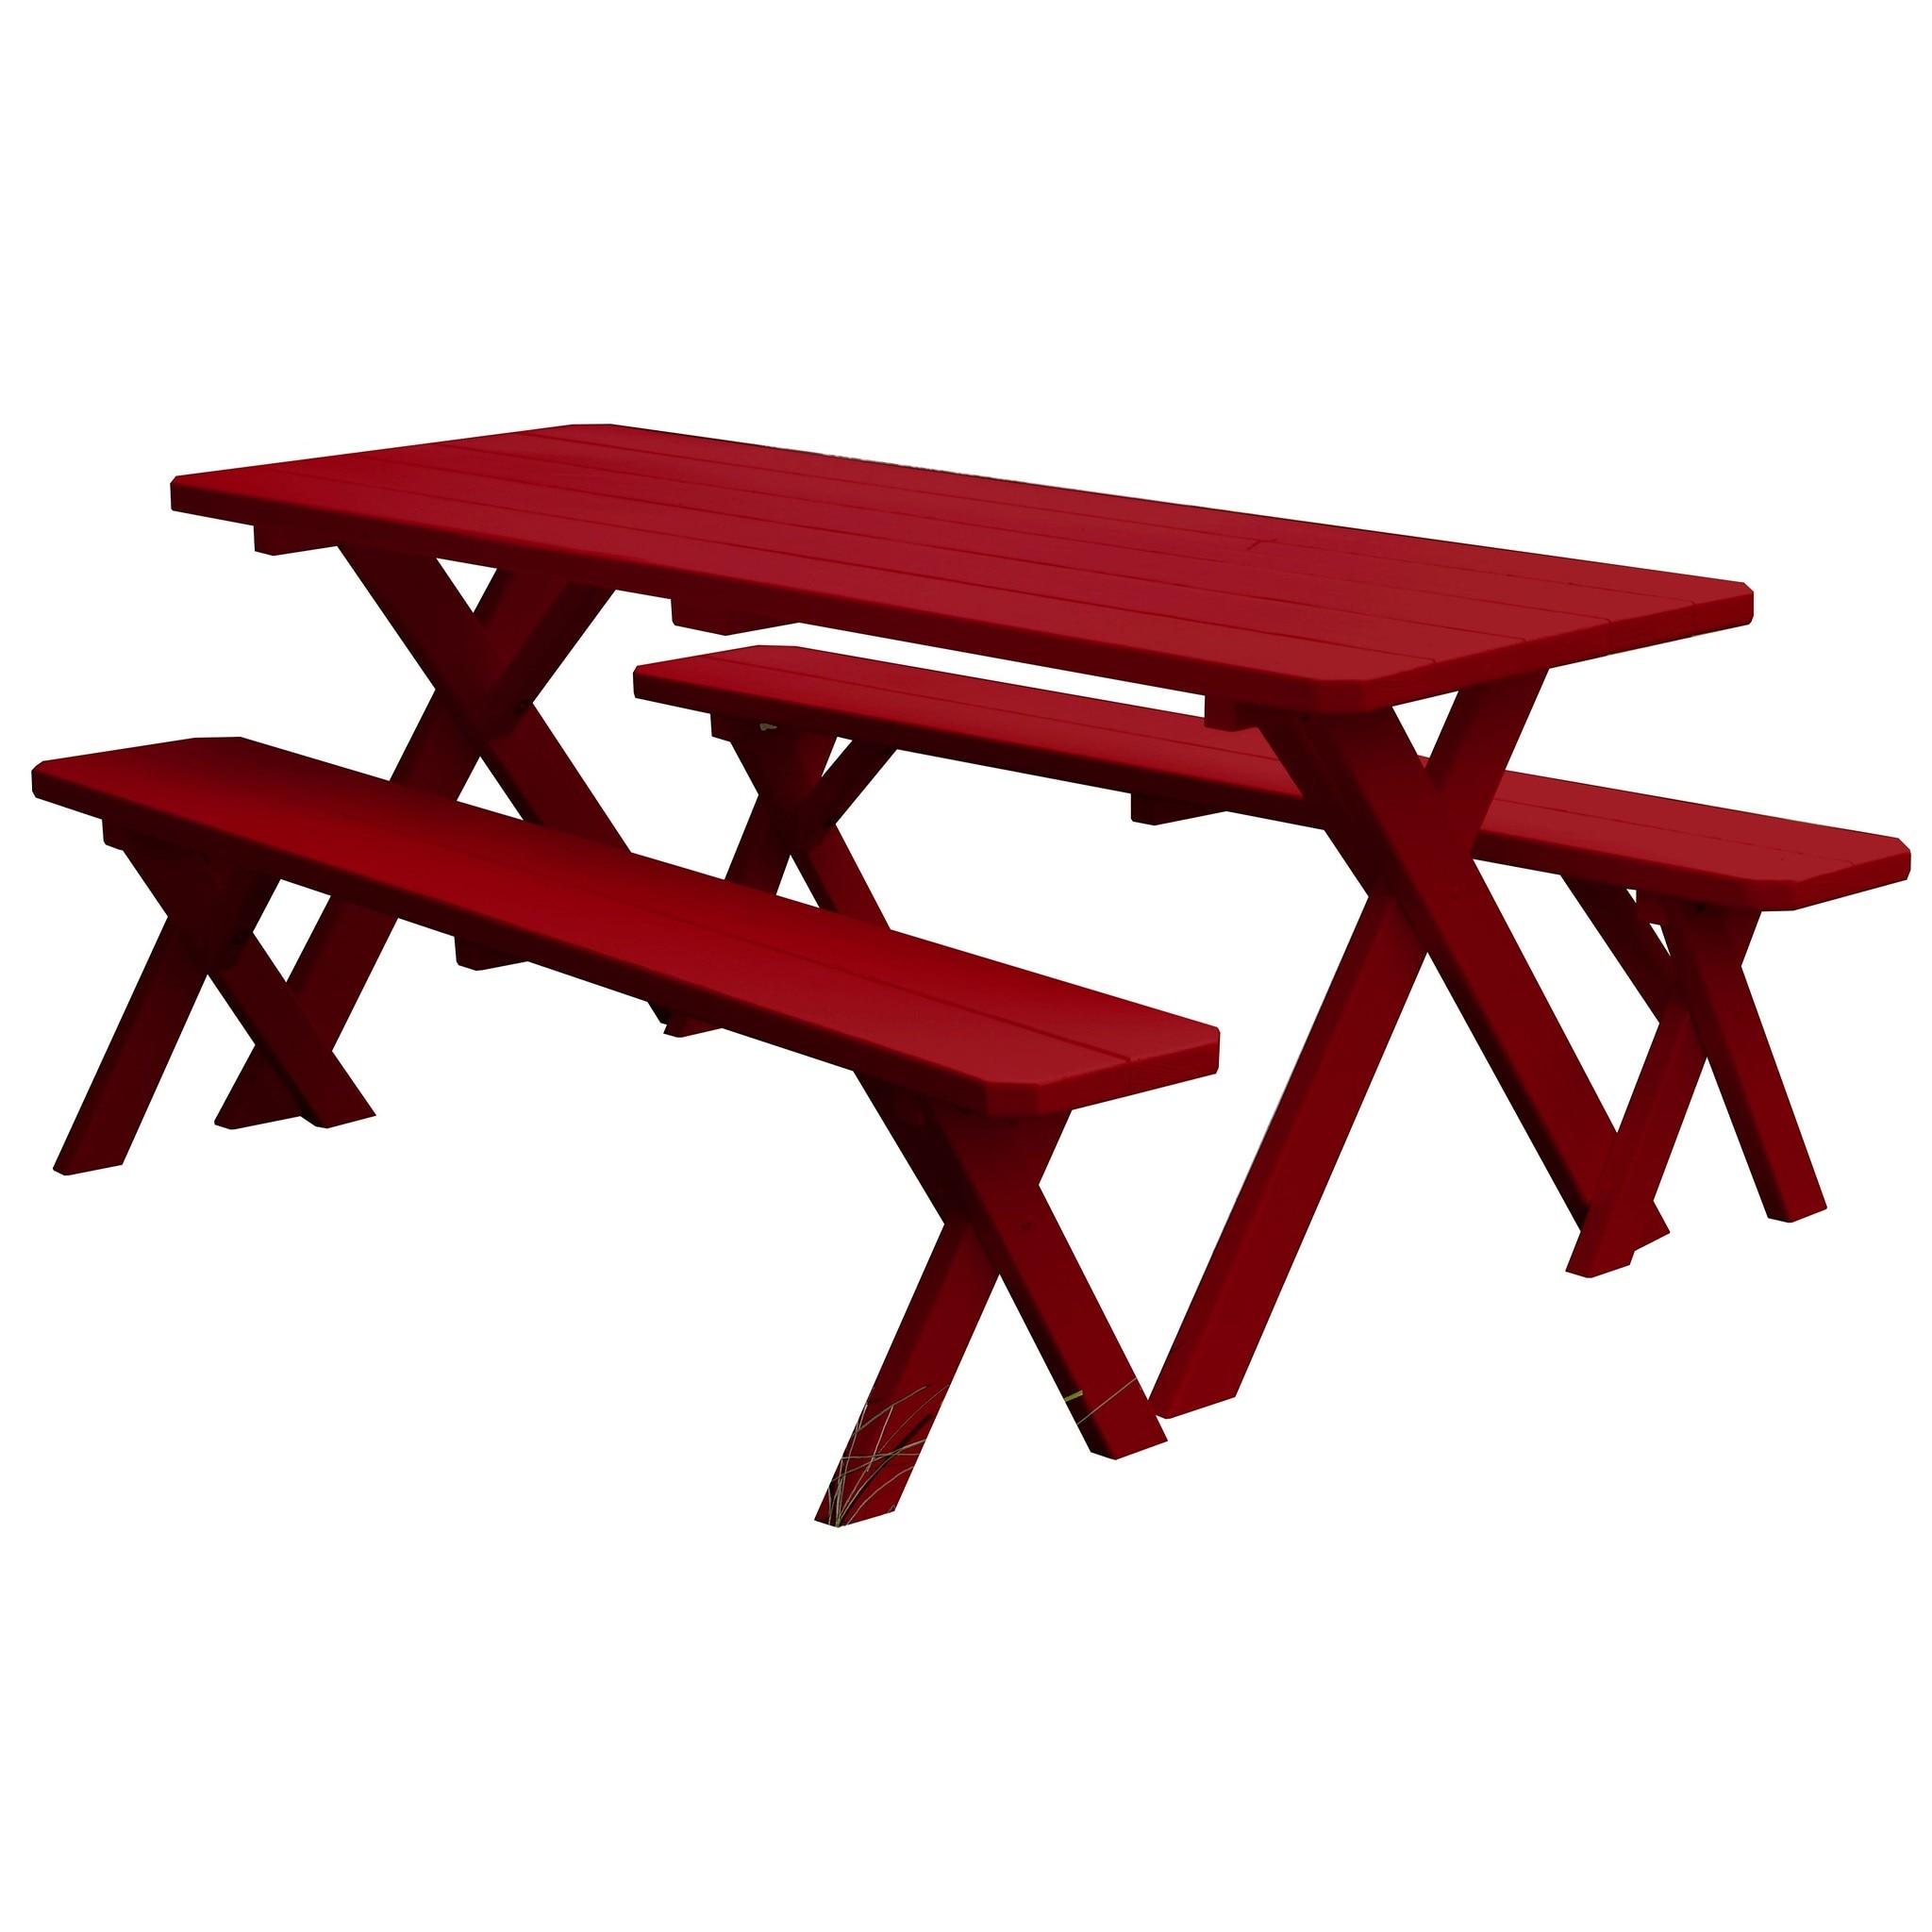 Pine 4 Cross-leg Picnic Table With 2 Benches